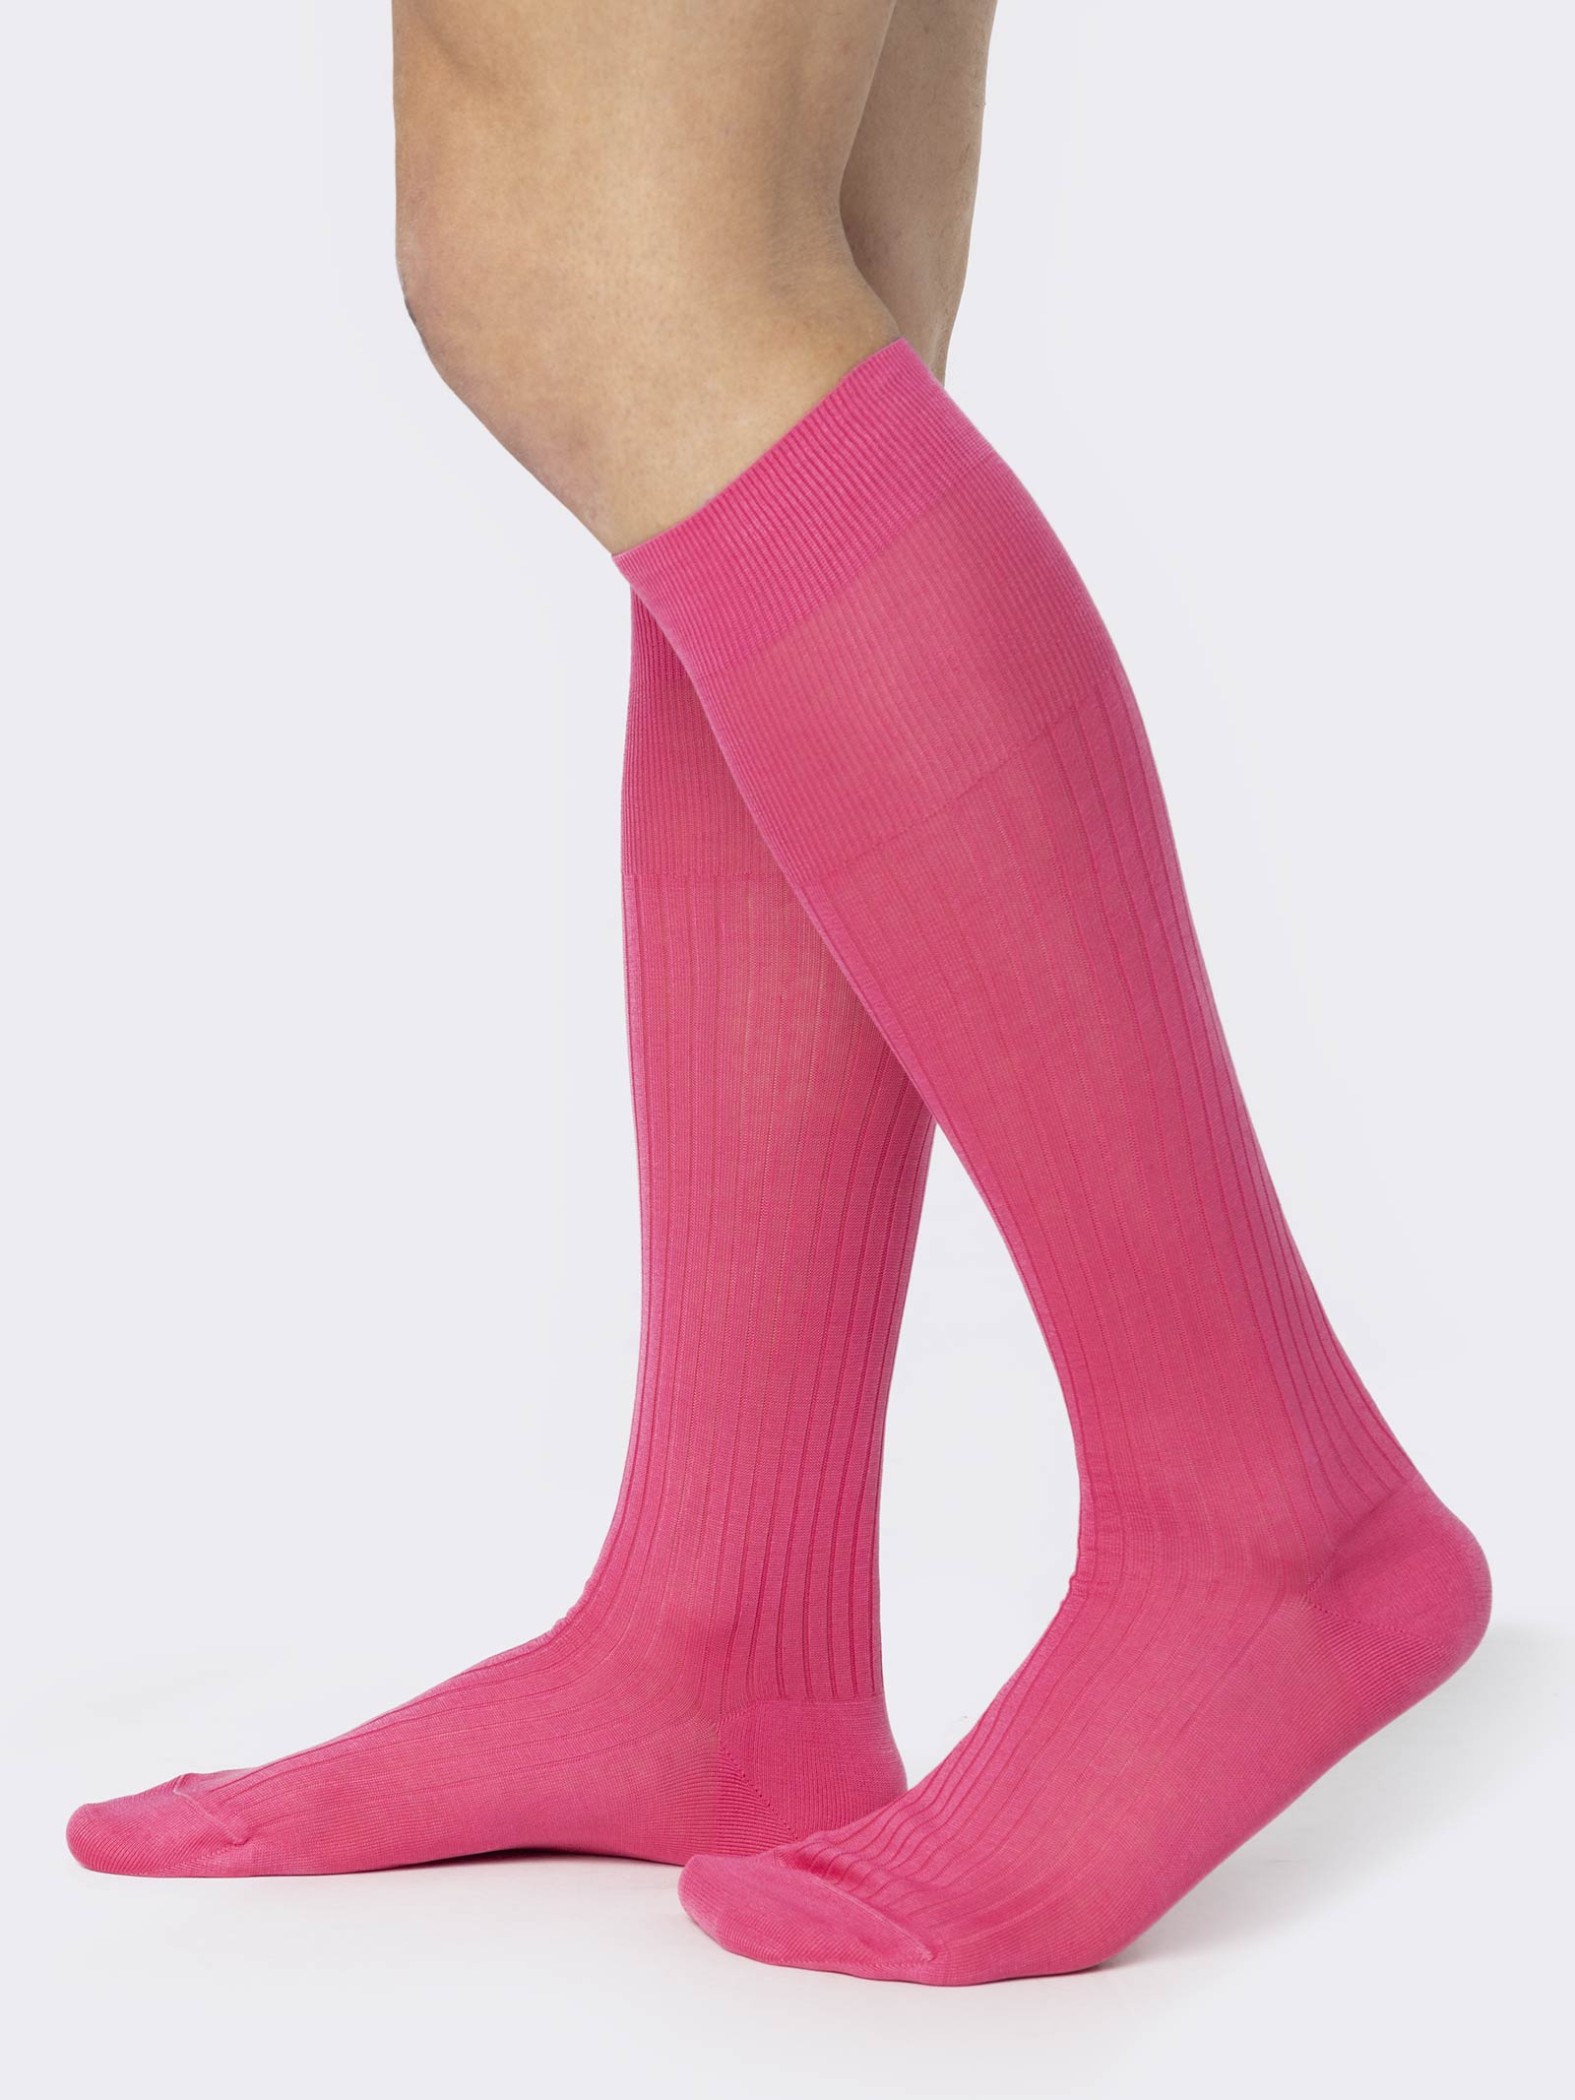 100% Fil d'Écosse cotton lisle Knee high socks - Made in Italy